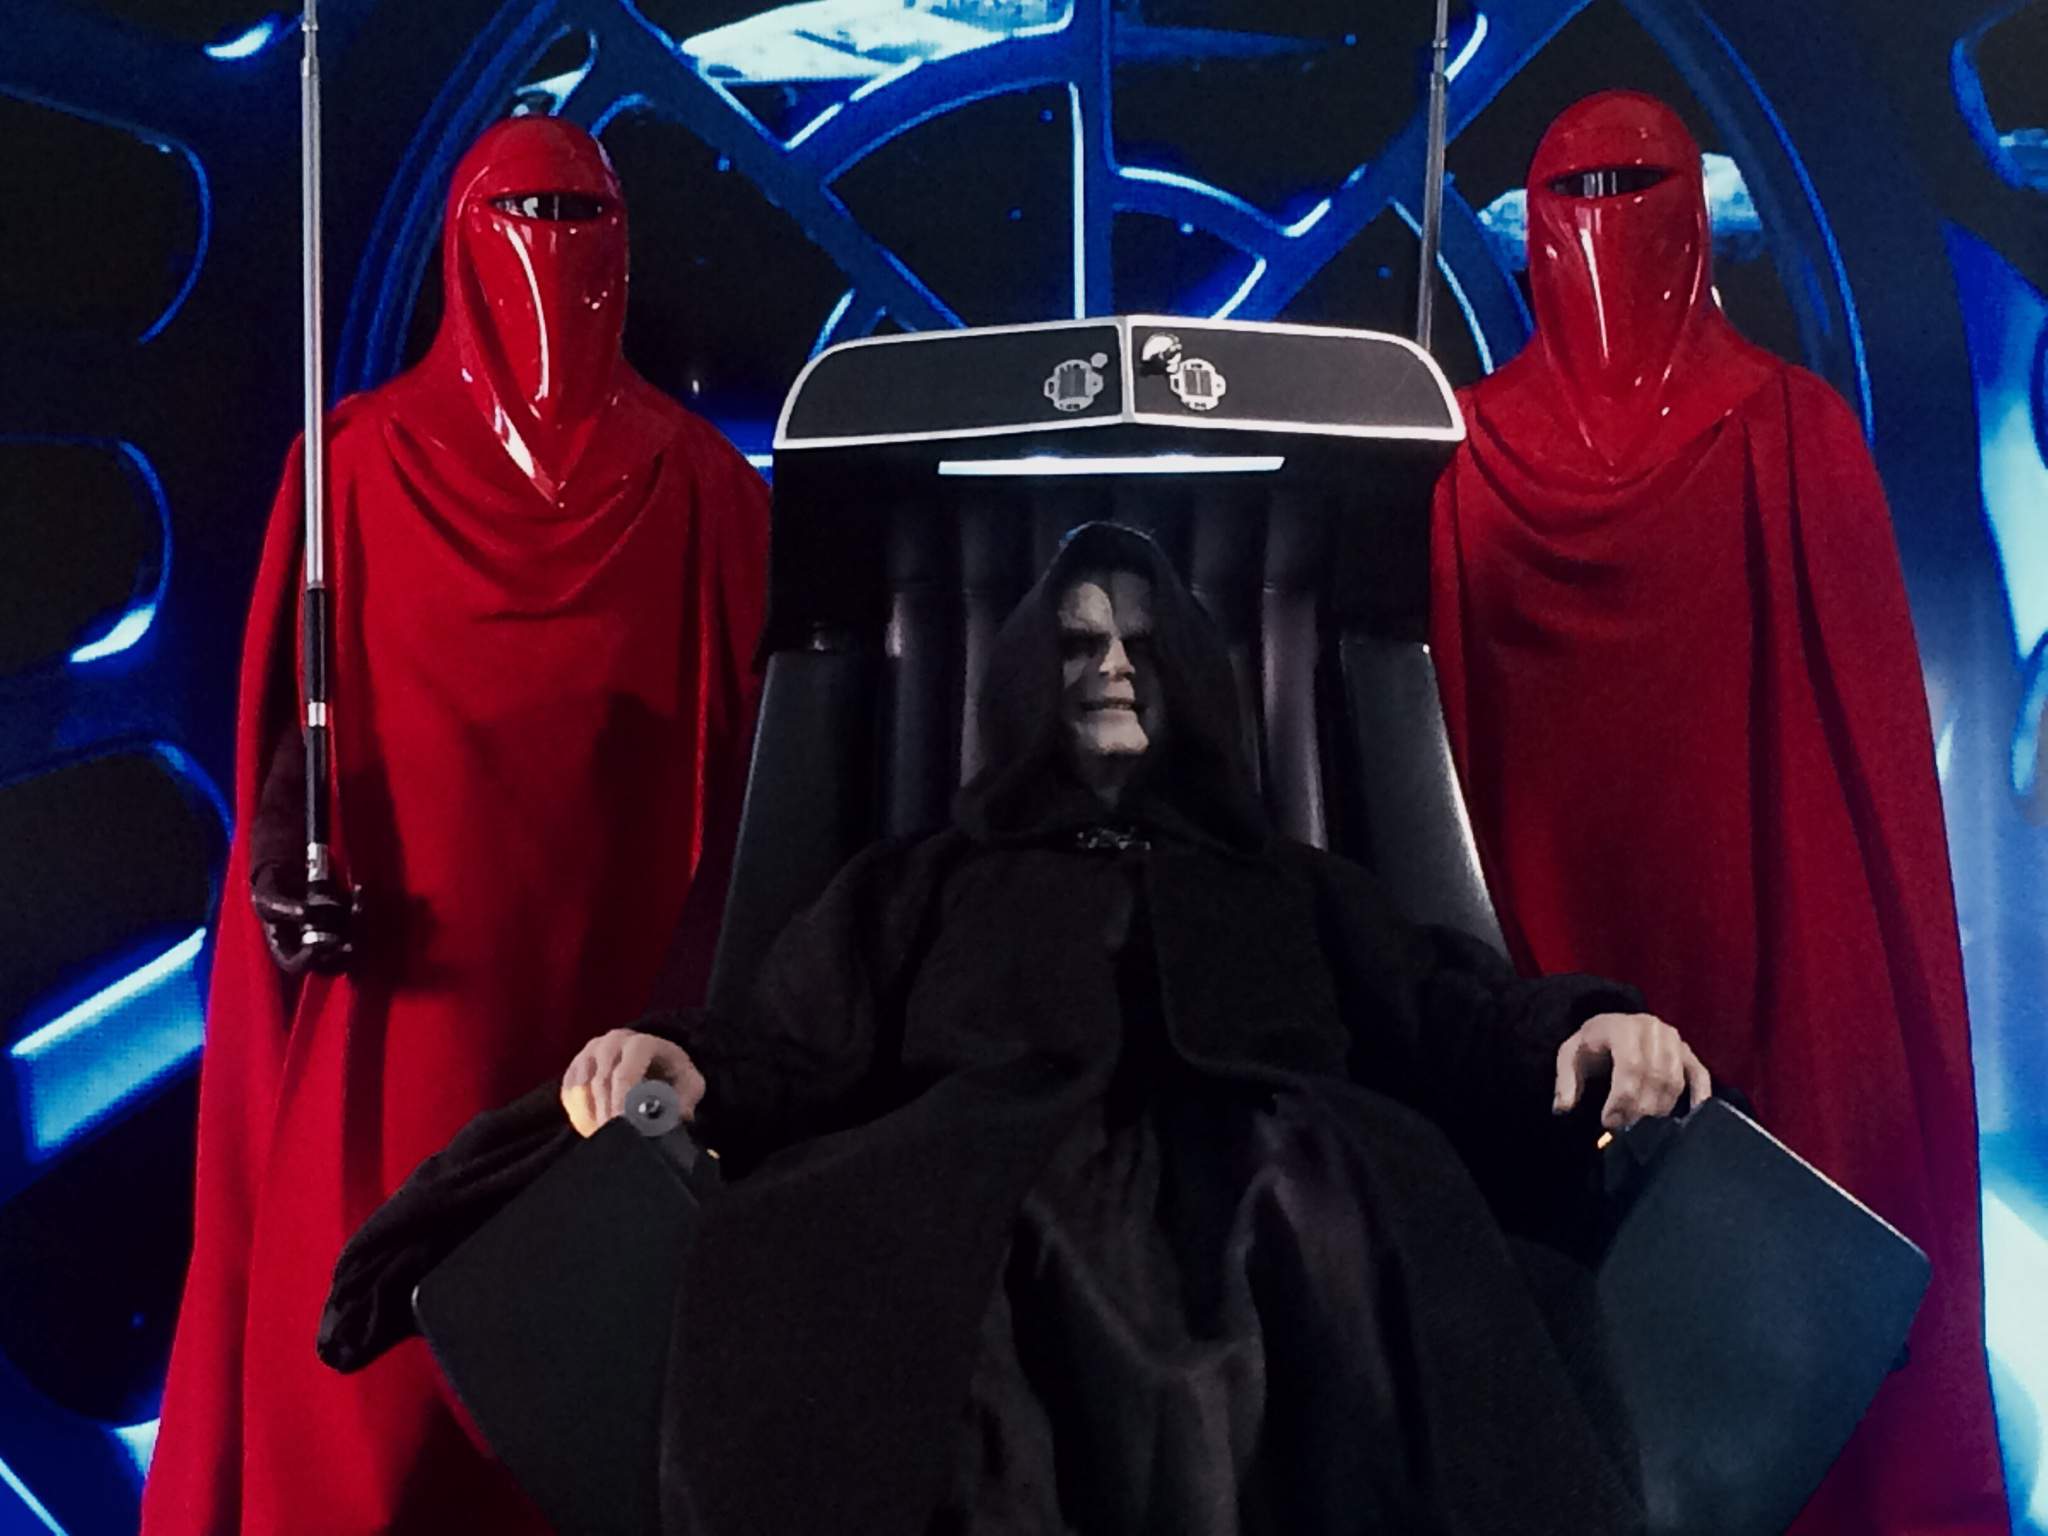 palpatine deluxe hot toys